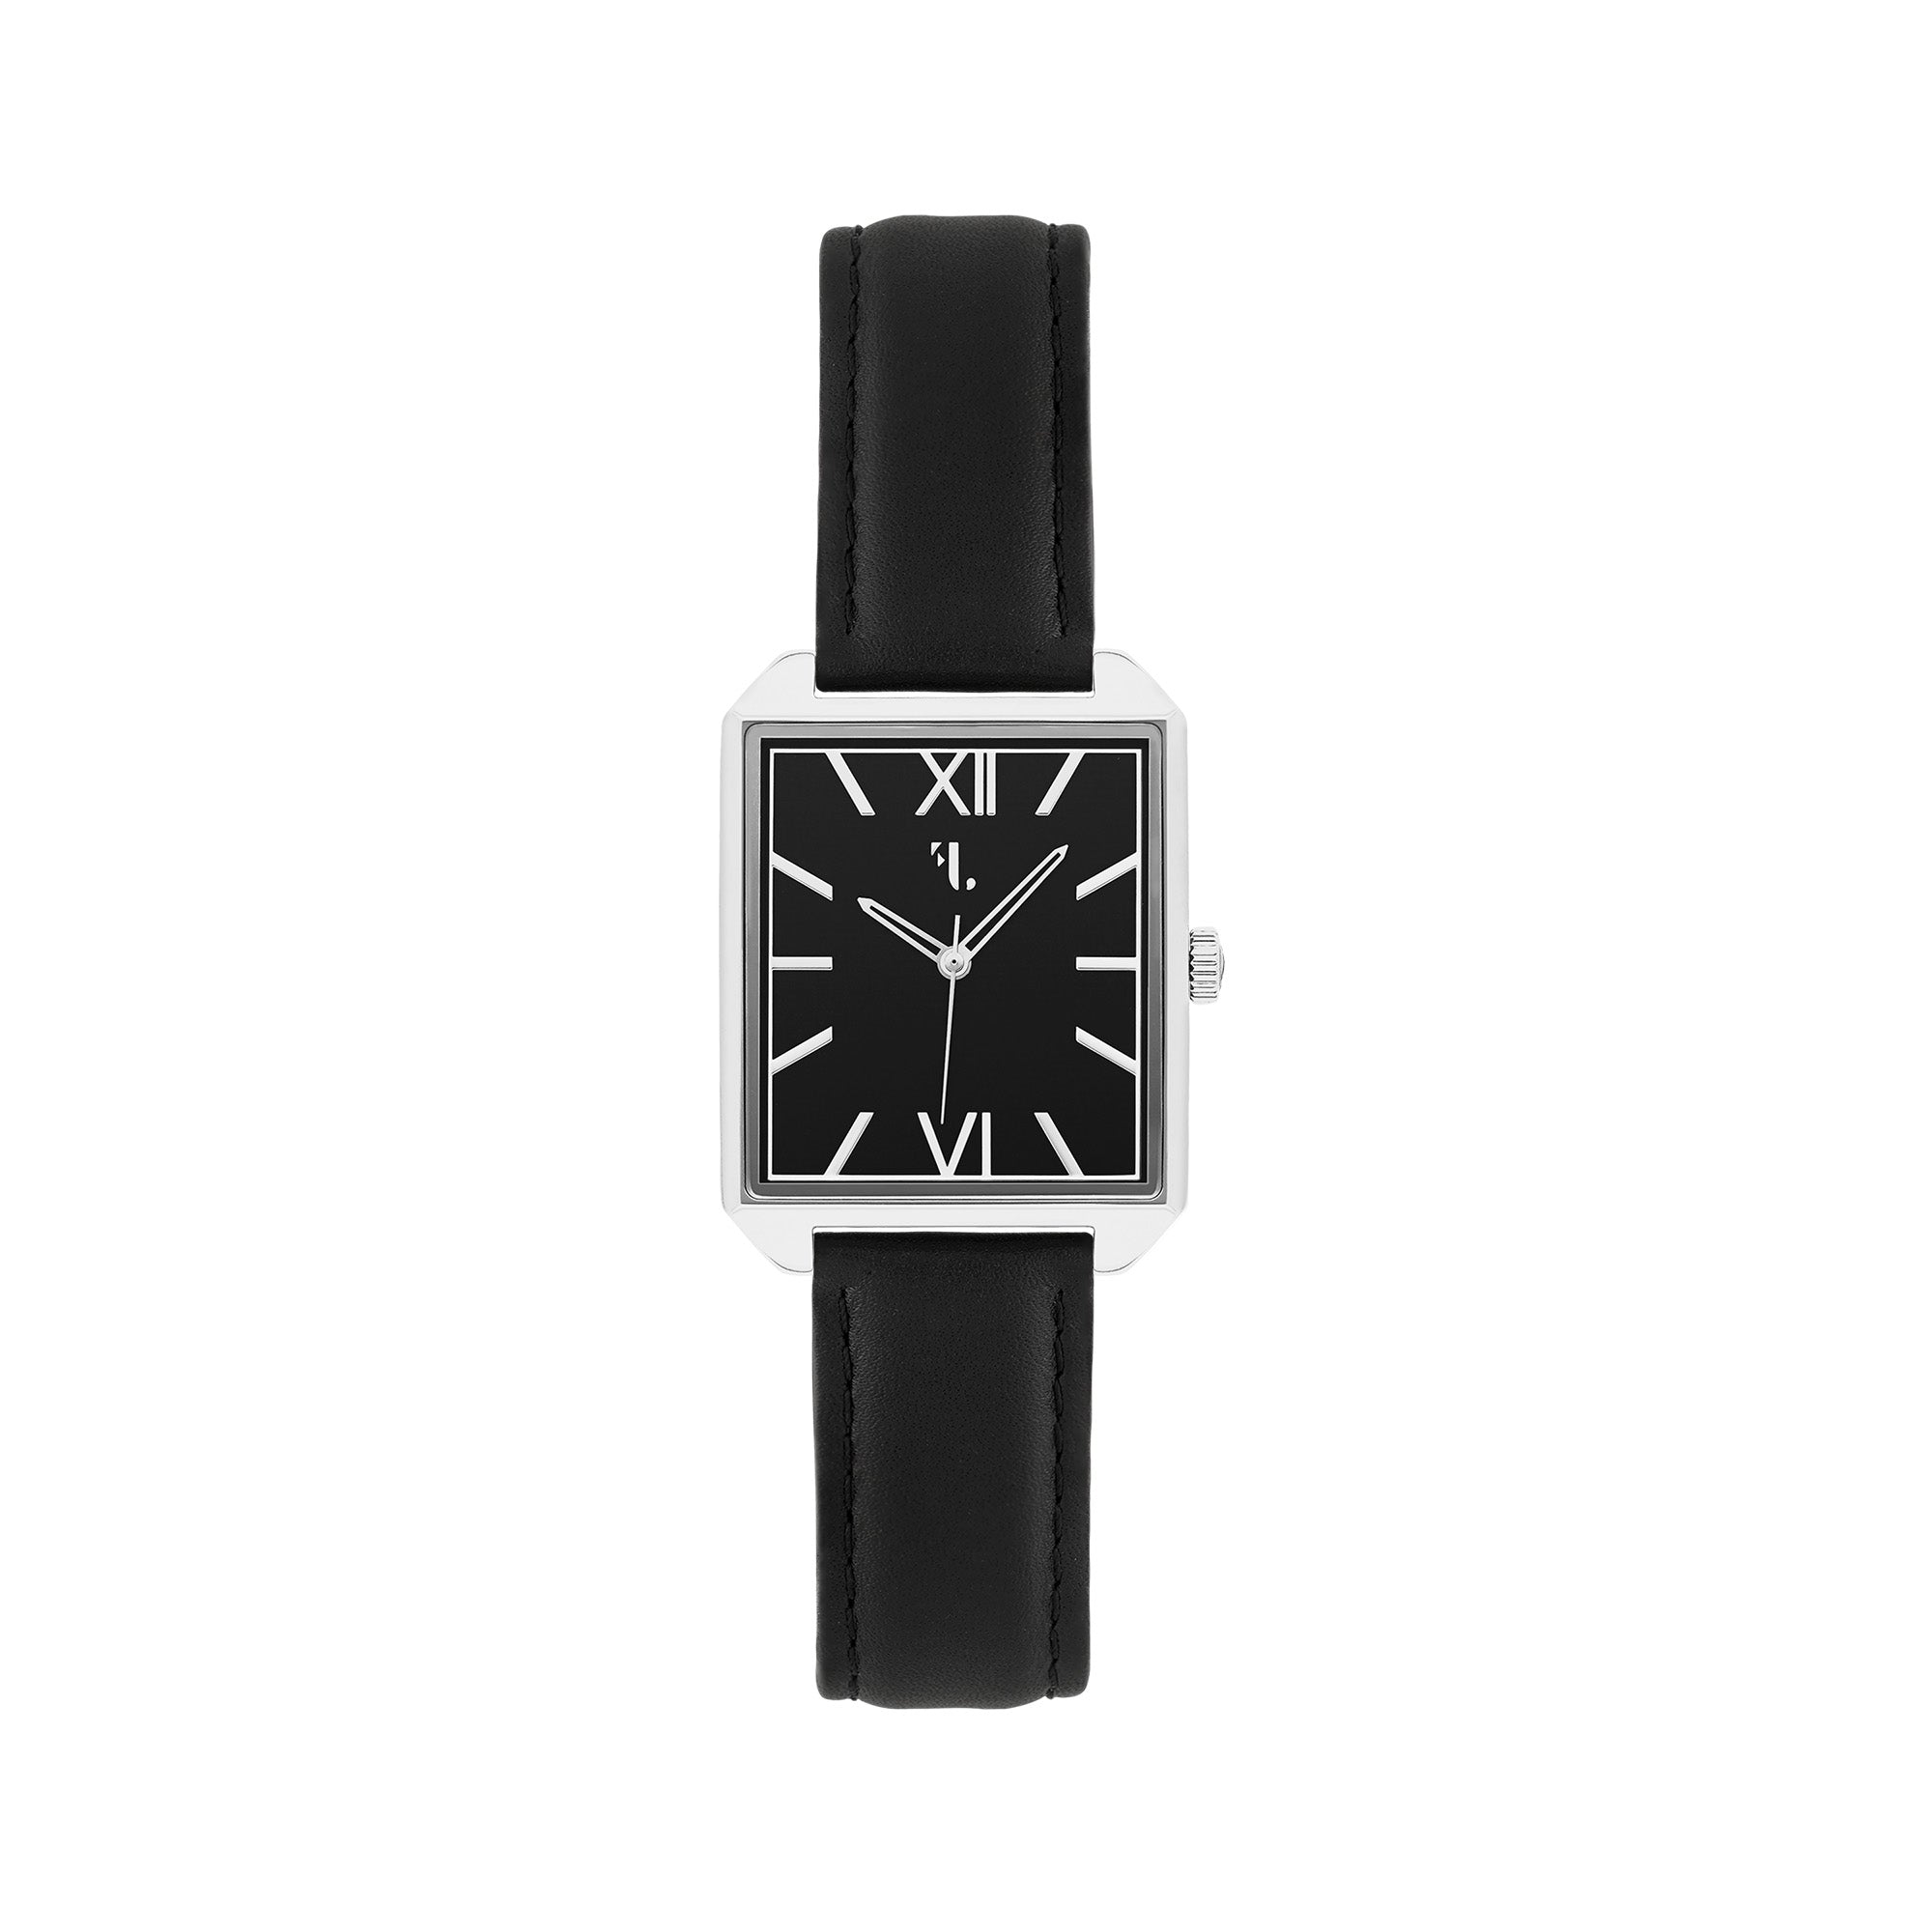 Discover a unique and modern men's watch from Five Jwlry designed in Montreal. This square-shaped watch with a sleek dial is accompanied by a black leather strap. It is equipped with a silver case and hands with a black dial. It is designed with the greatest care with a quartz mechanism and it has a water resistance of 5ATM.